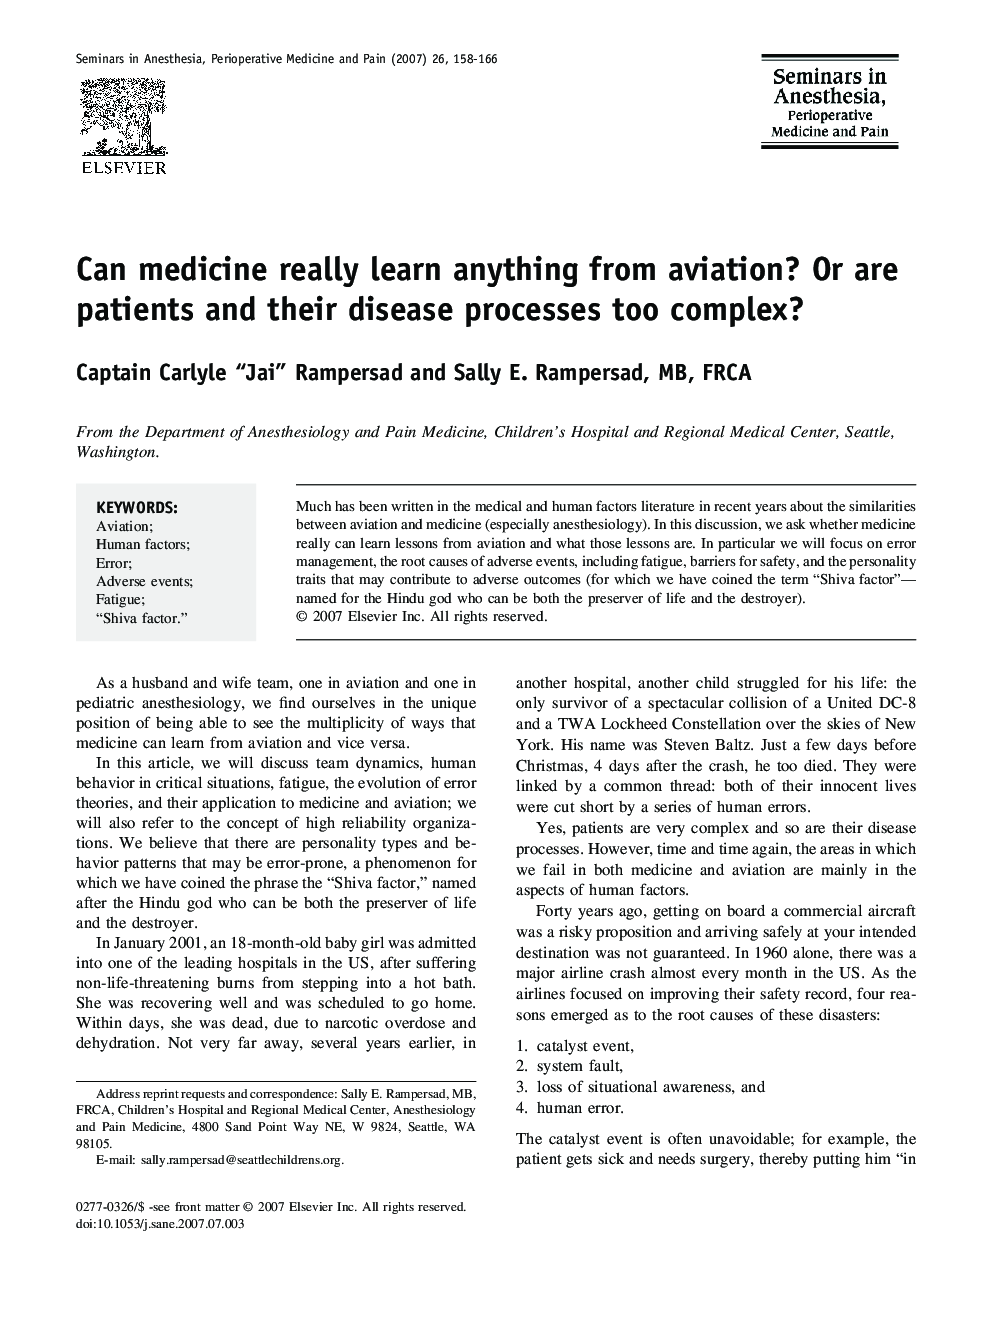 Can medicine really learn anything from aviation? Or are patients and their disease processes too complex?